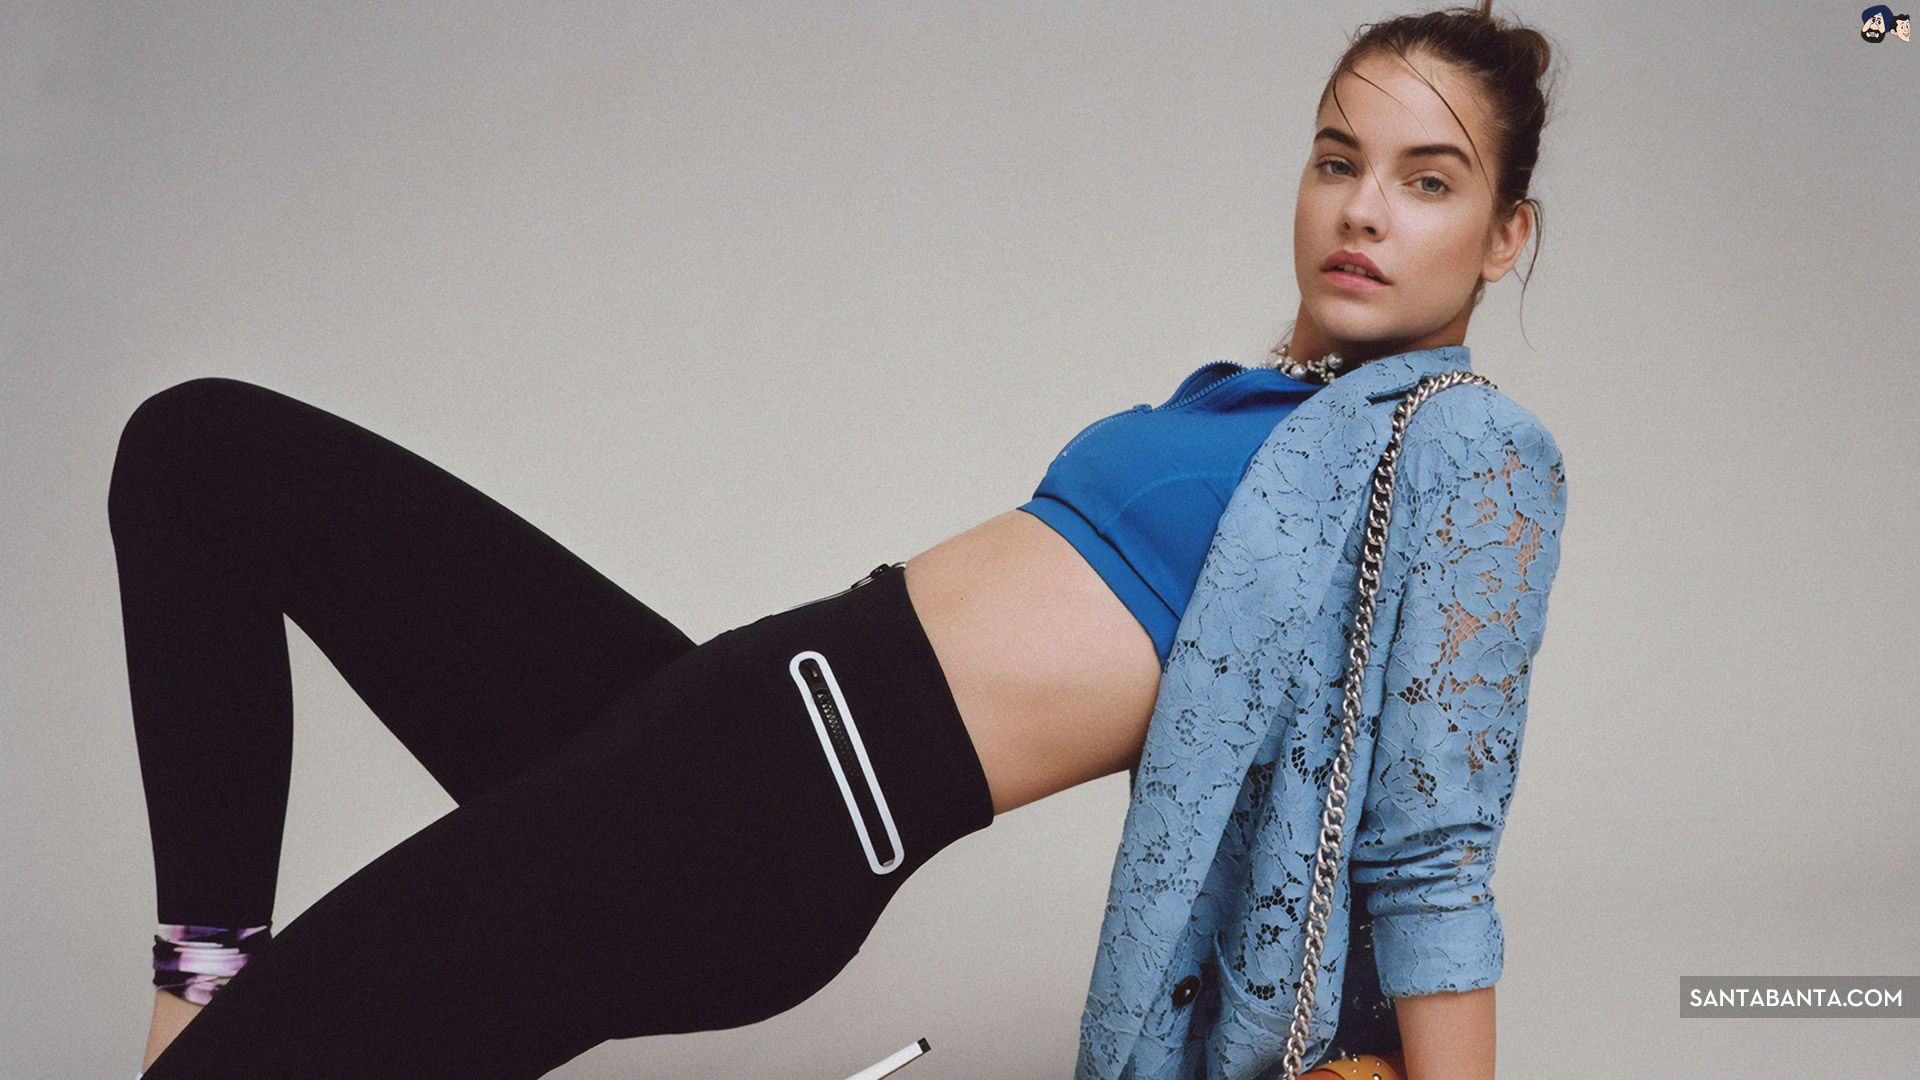 Barbara Palvin is a fascinating and bewitching hottie in sportswear